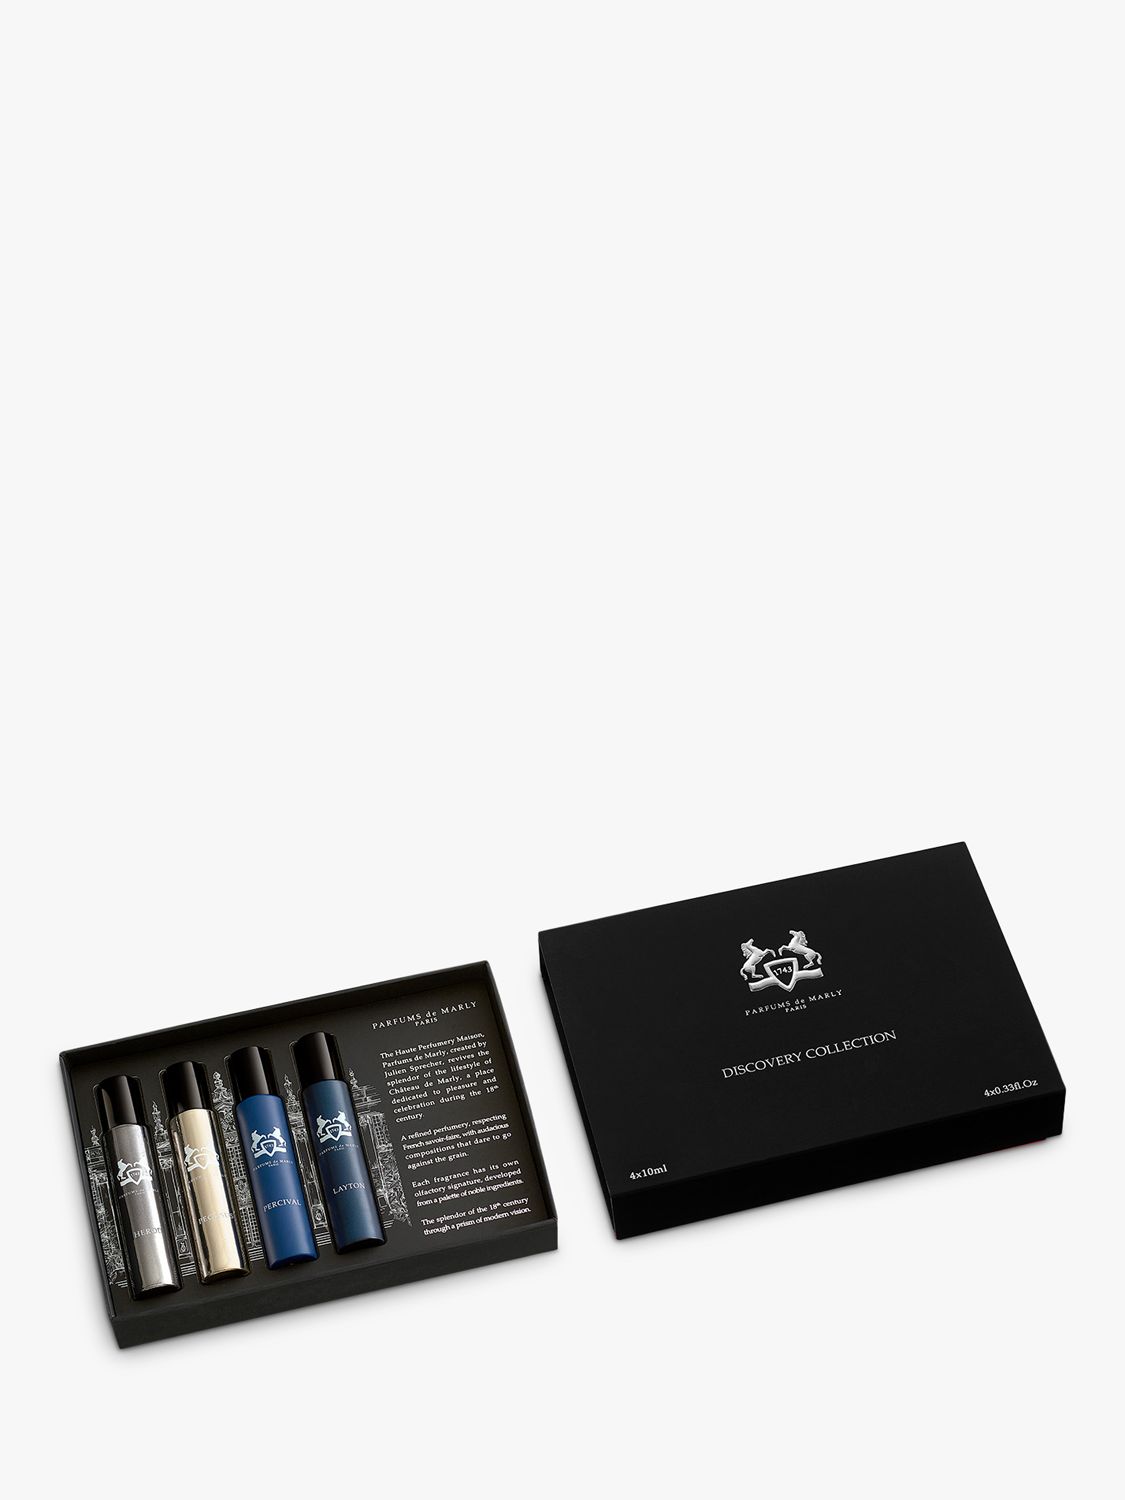 Parfums de Marly Masculine Discovery Collection Castle Edition Fragrance Gift Set 1